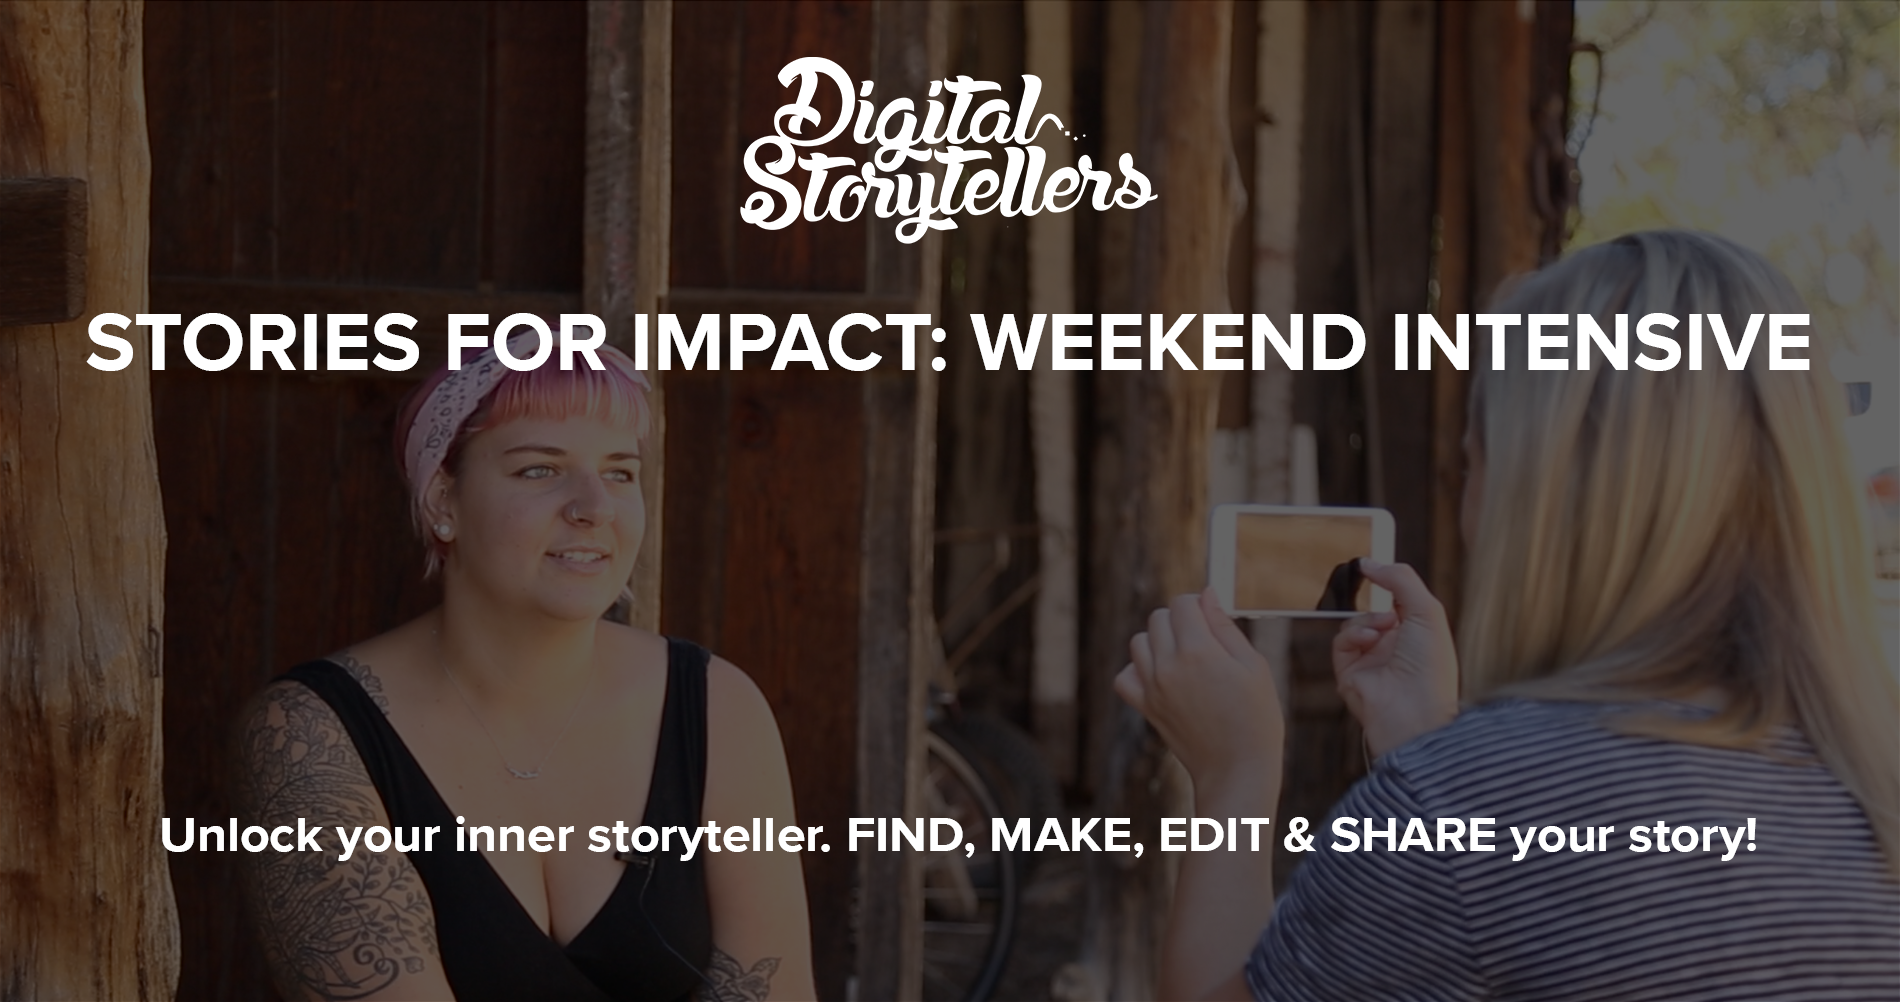 Digital Storytelling Weekend Intensive – FIND, MAKE, EDIT & SHARE your Impact Story (Melbourne)